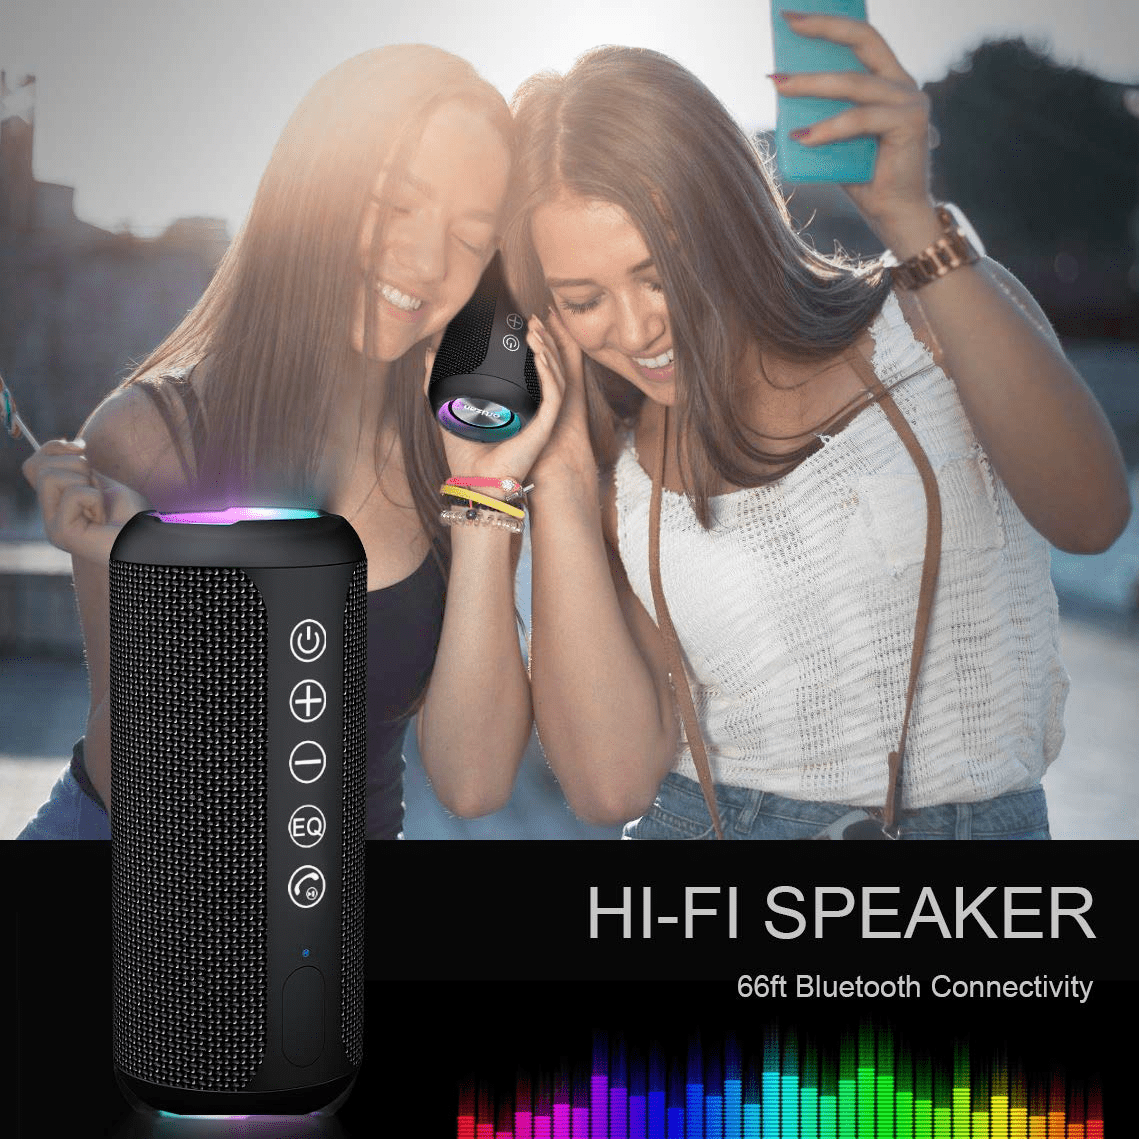 Outdoor Wireless Speaker 24W Loud Stereo Sound Dual Pairing for iPhone IPX7 Waterproof Portable Bluetooth Speaker with LED Lights Ortizan Bluetooth Speaker Hi-Fi Sound & Extra Bass 30H Playtime 